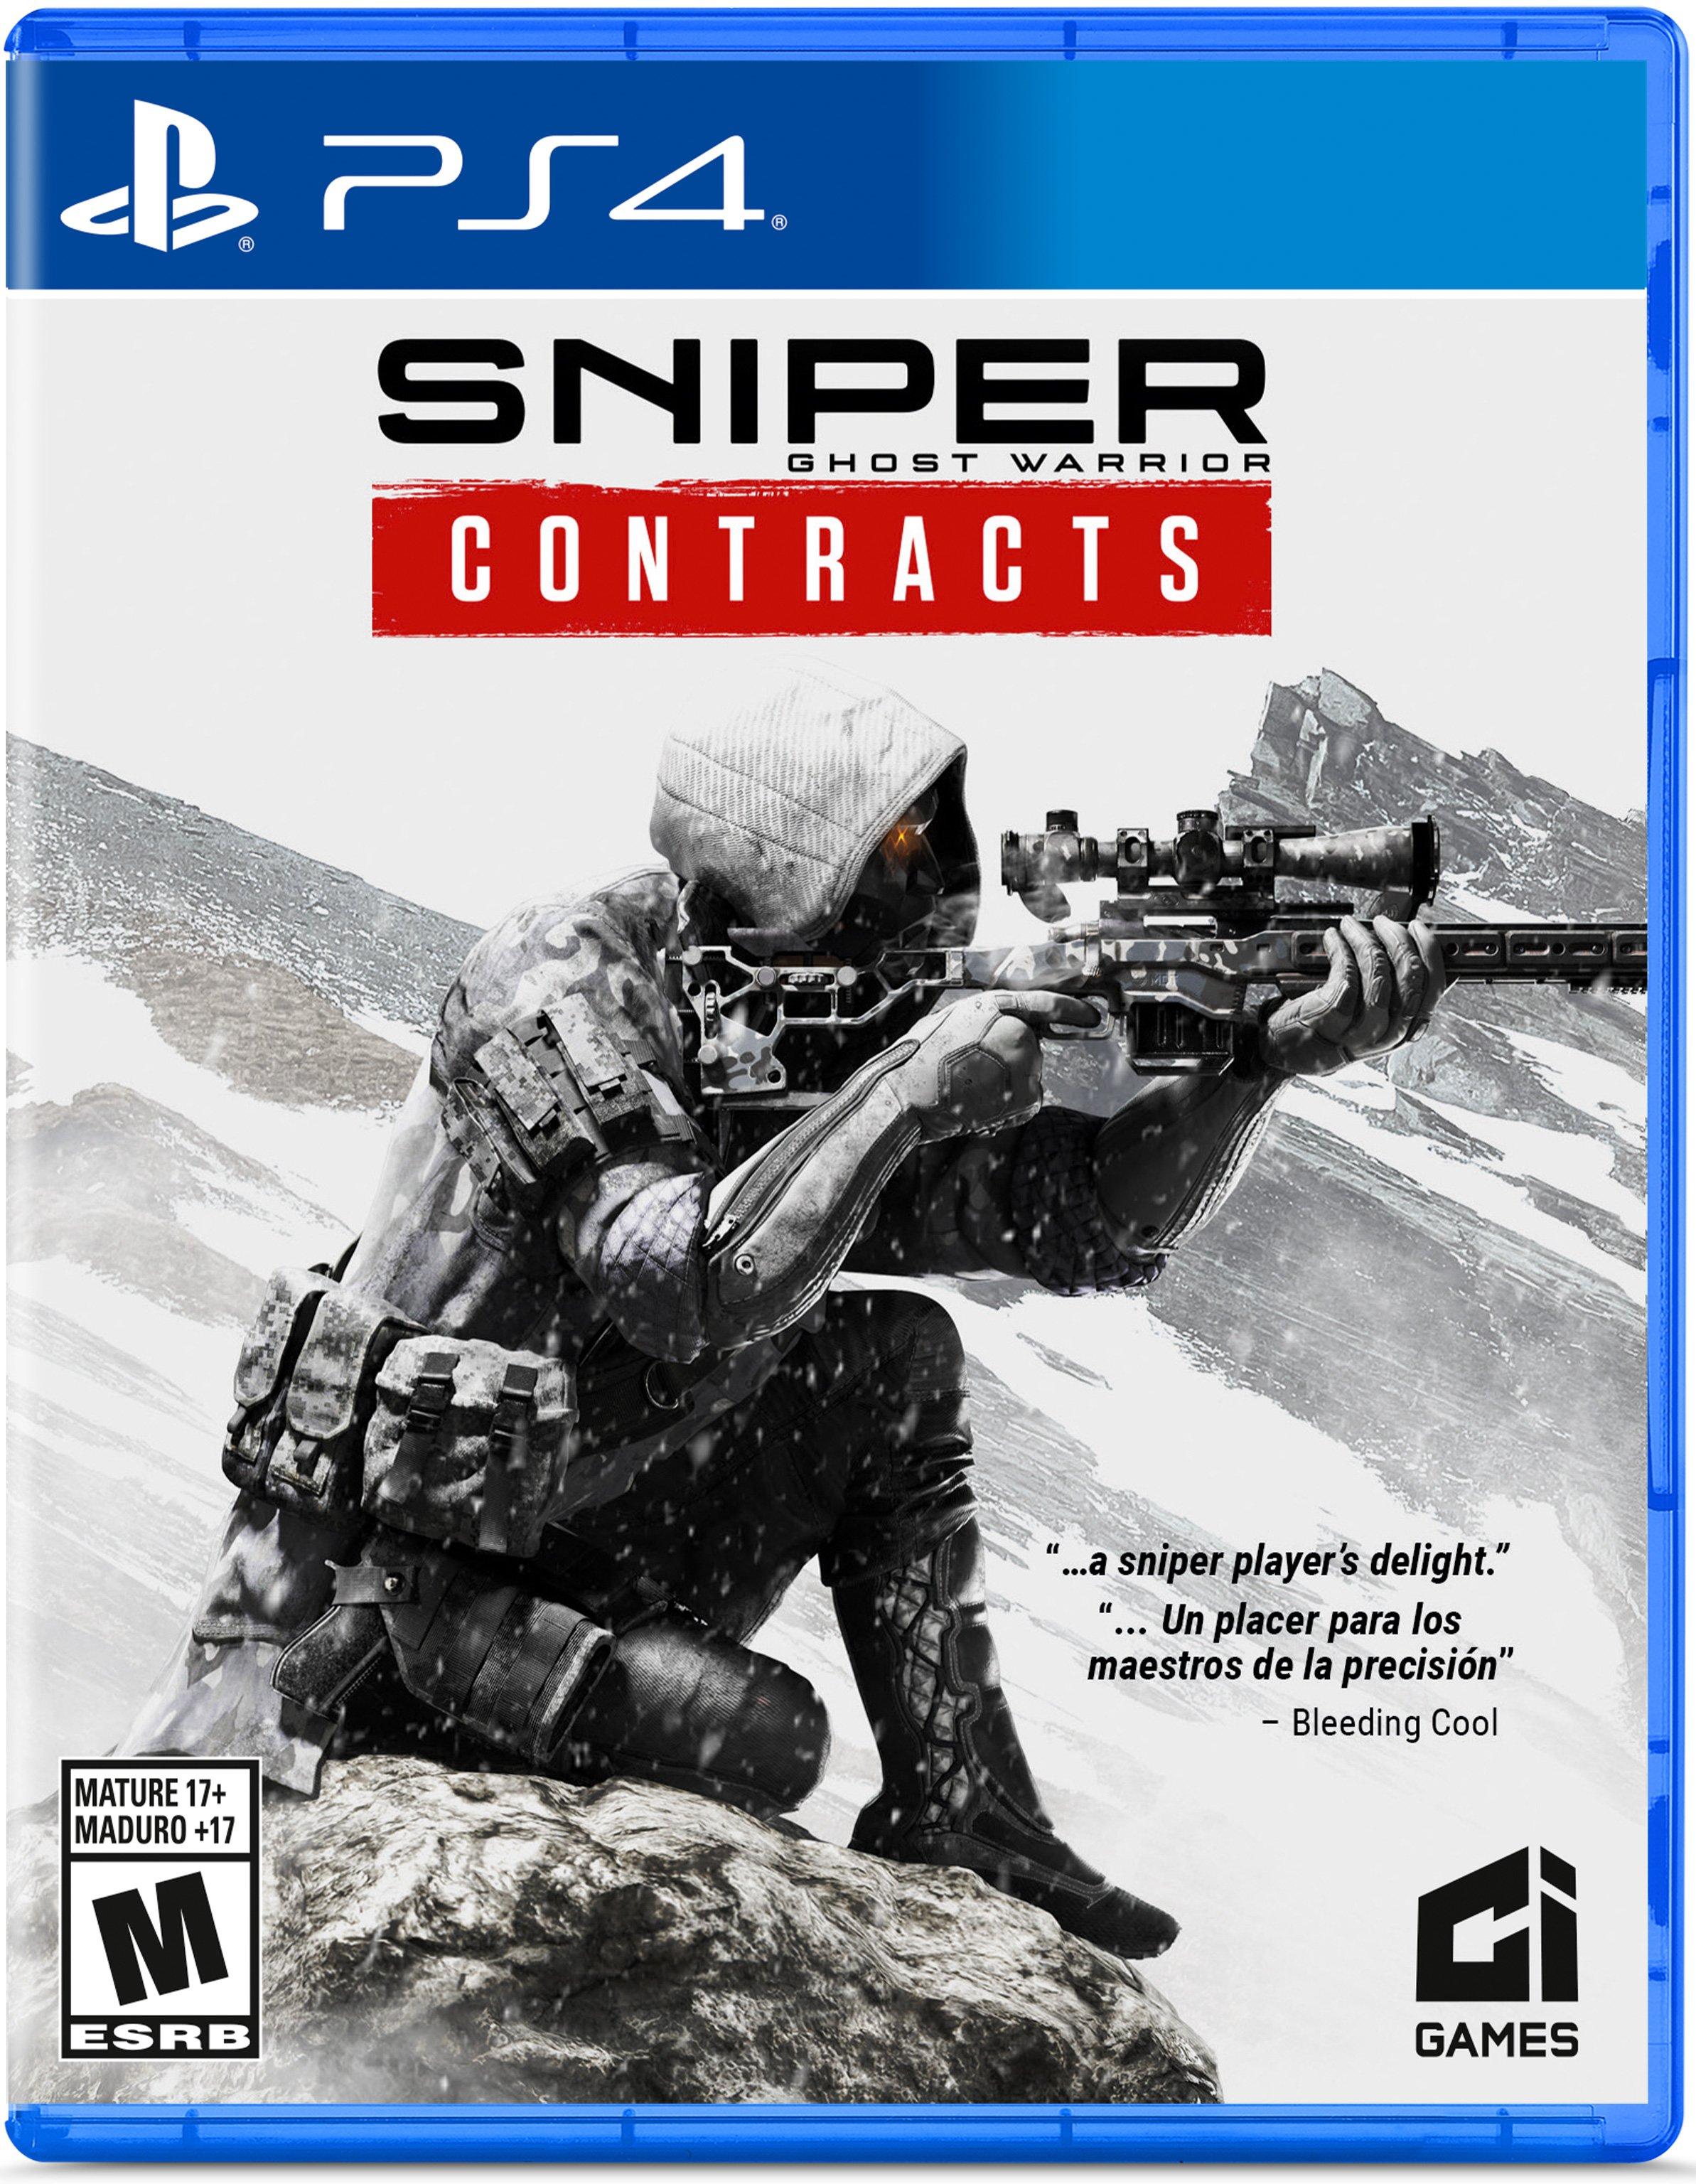 analyse pakke beskytte Sniper Ghost Warrior Contracts - PlayStation 4 | PlayStation 4 | GameStop